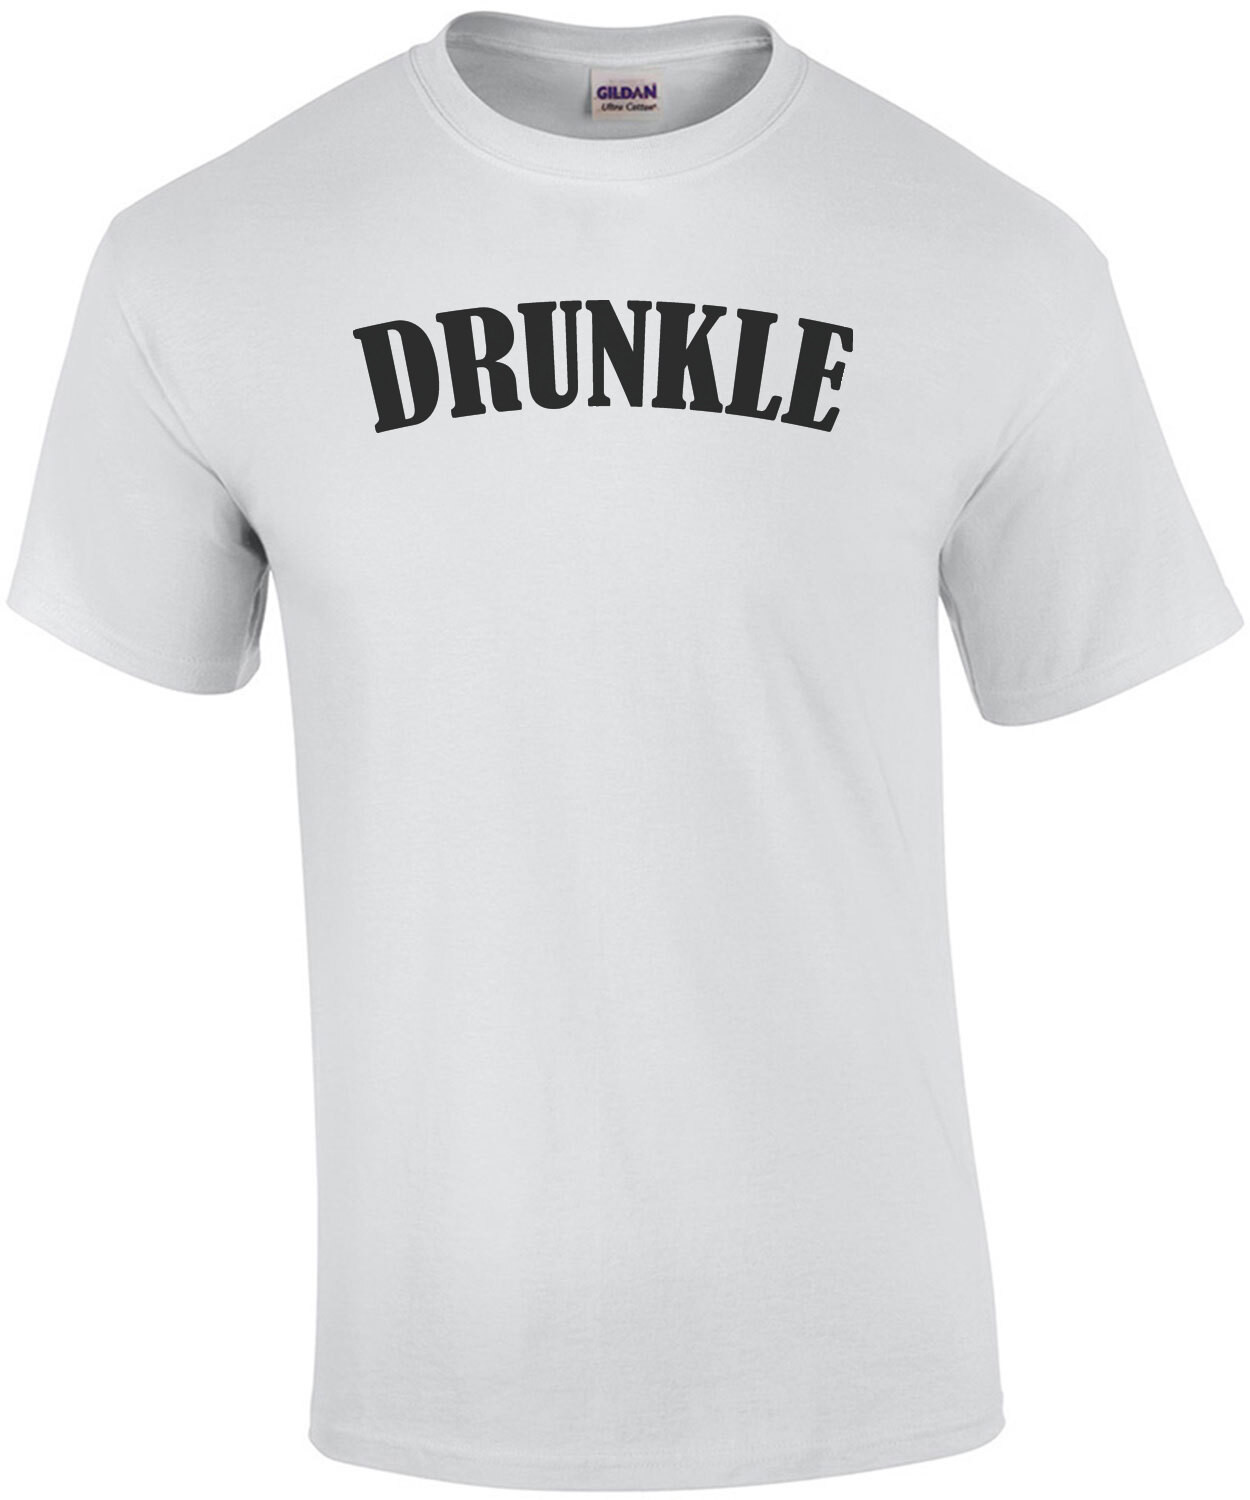 Drunkle - funny uncle drinking t-shirt